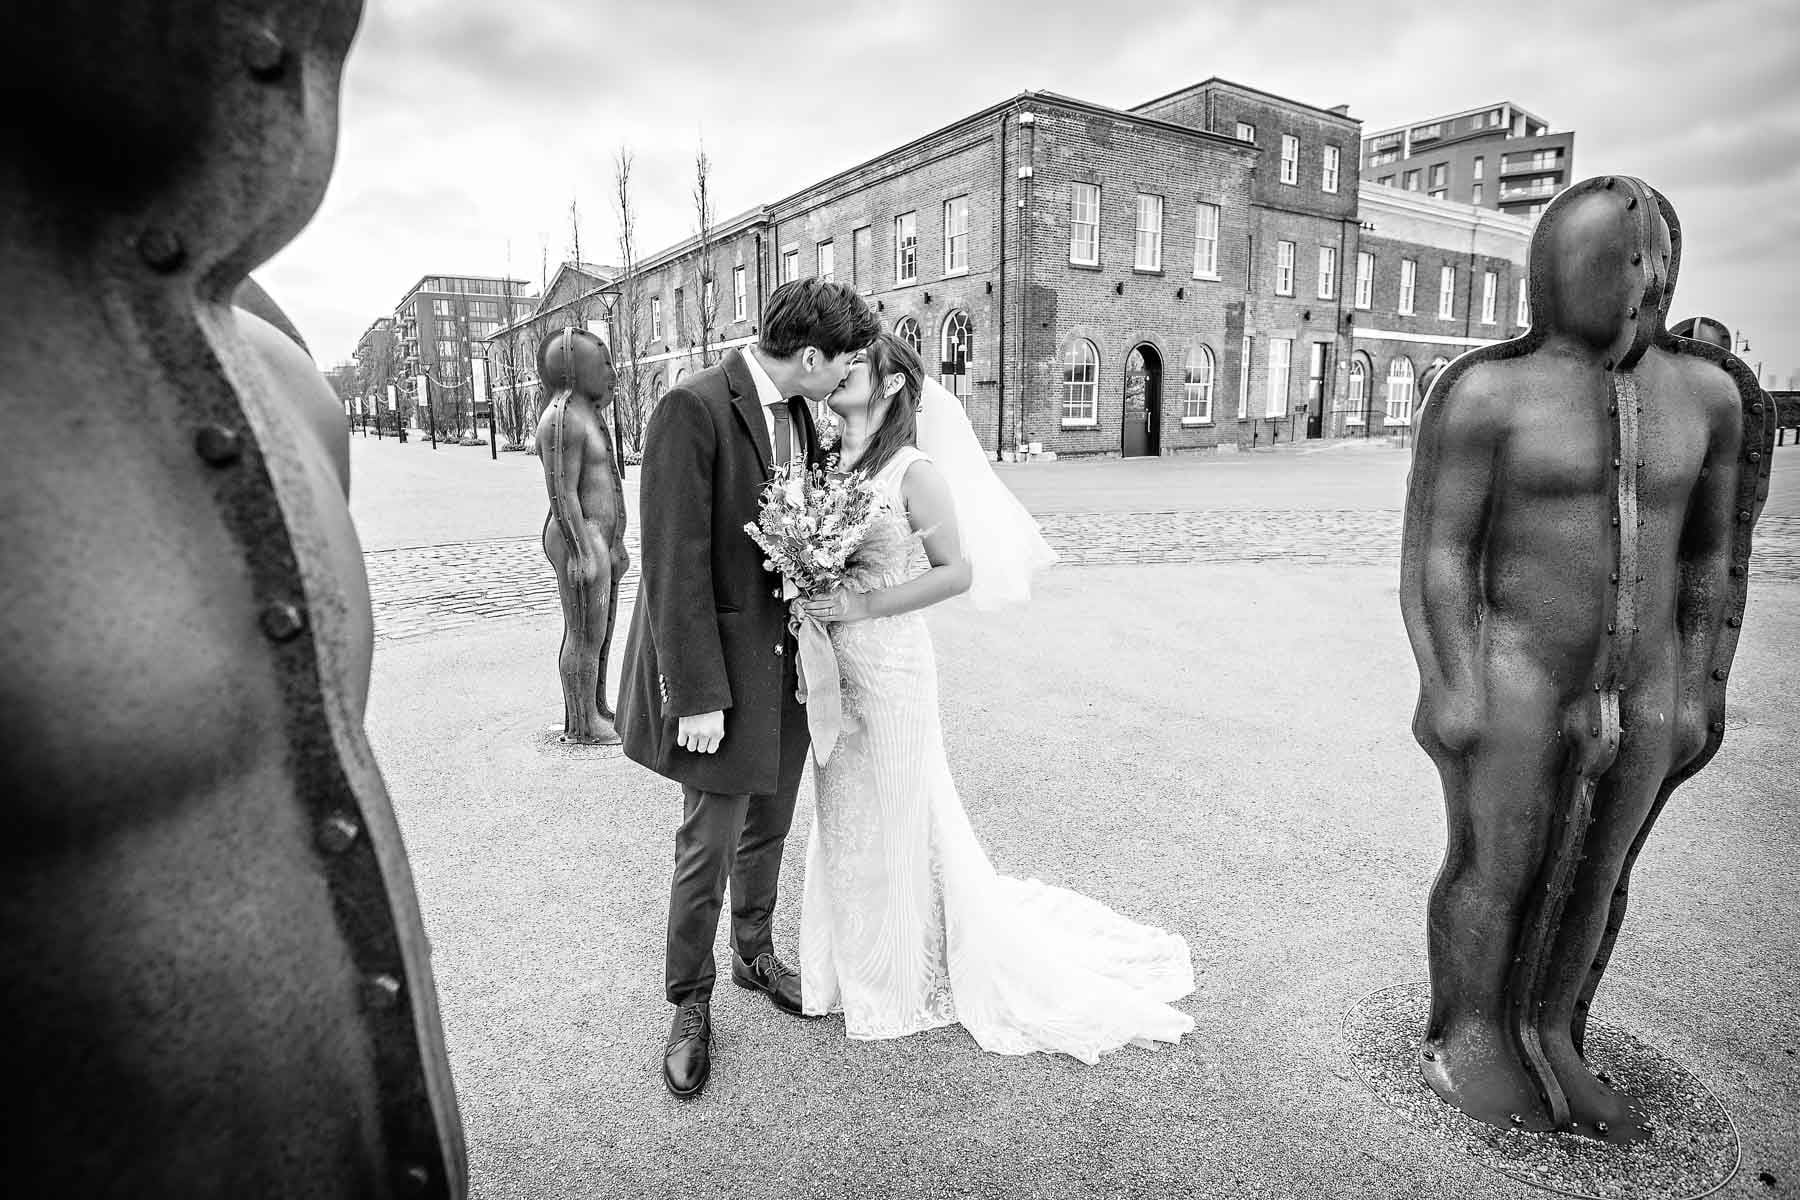 A newlywed couple kiss in between two statues at Woolwich's Royal Arsenal Heritage Site